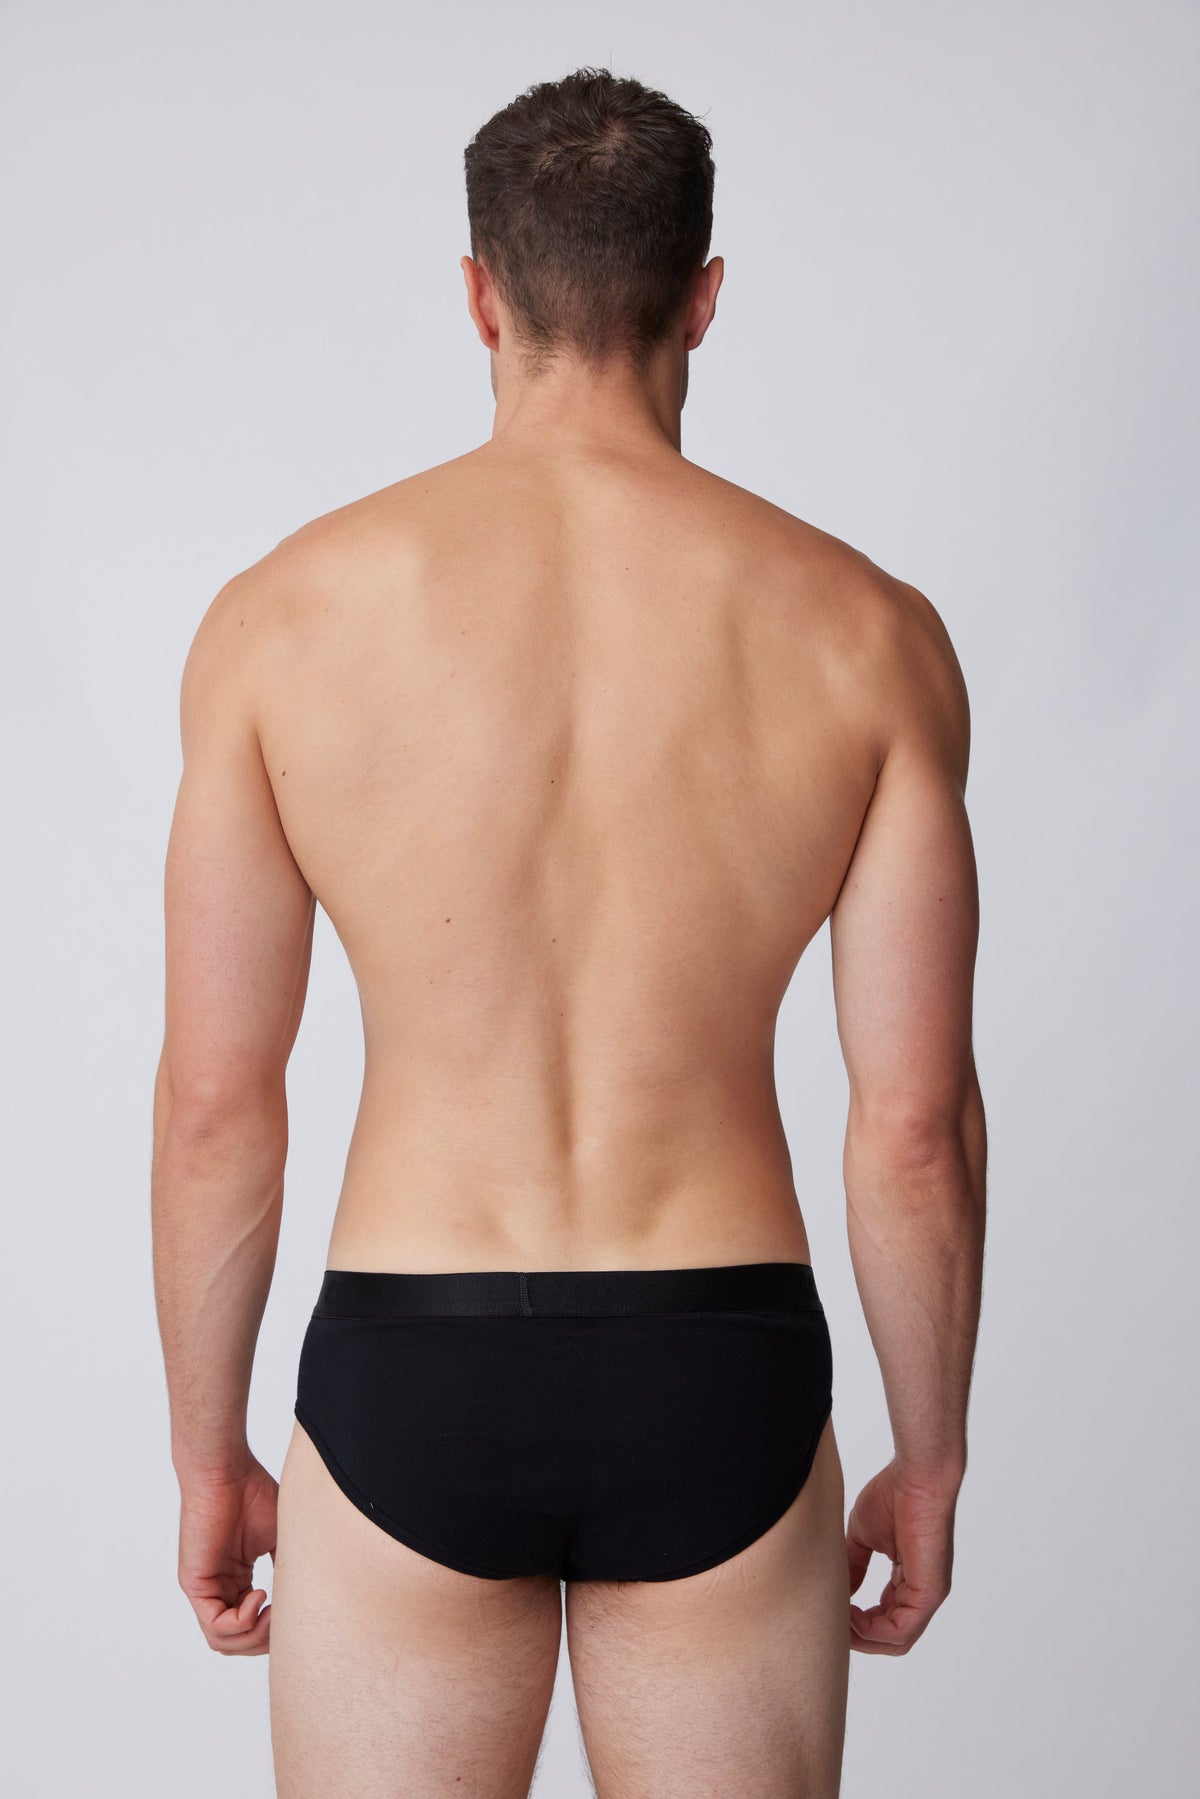 
            White, brunet male wearing only black brief from behind